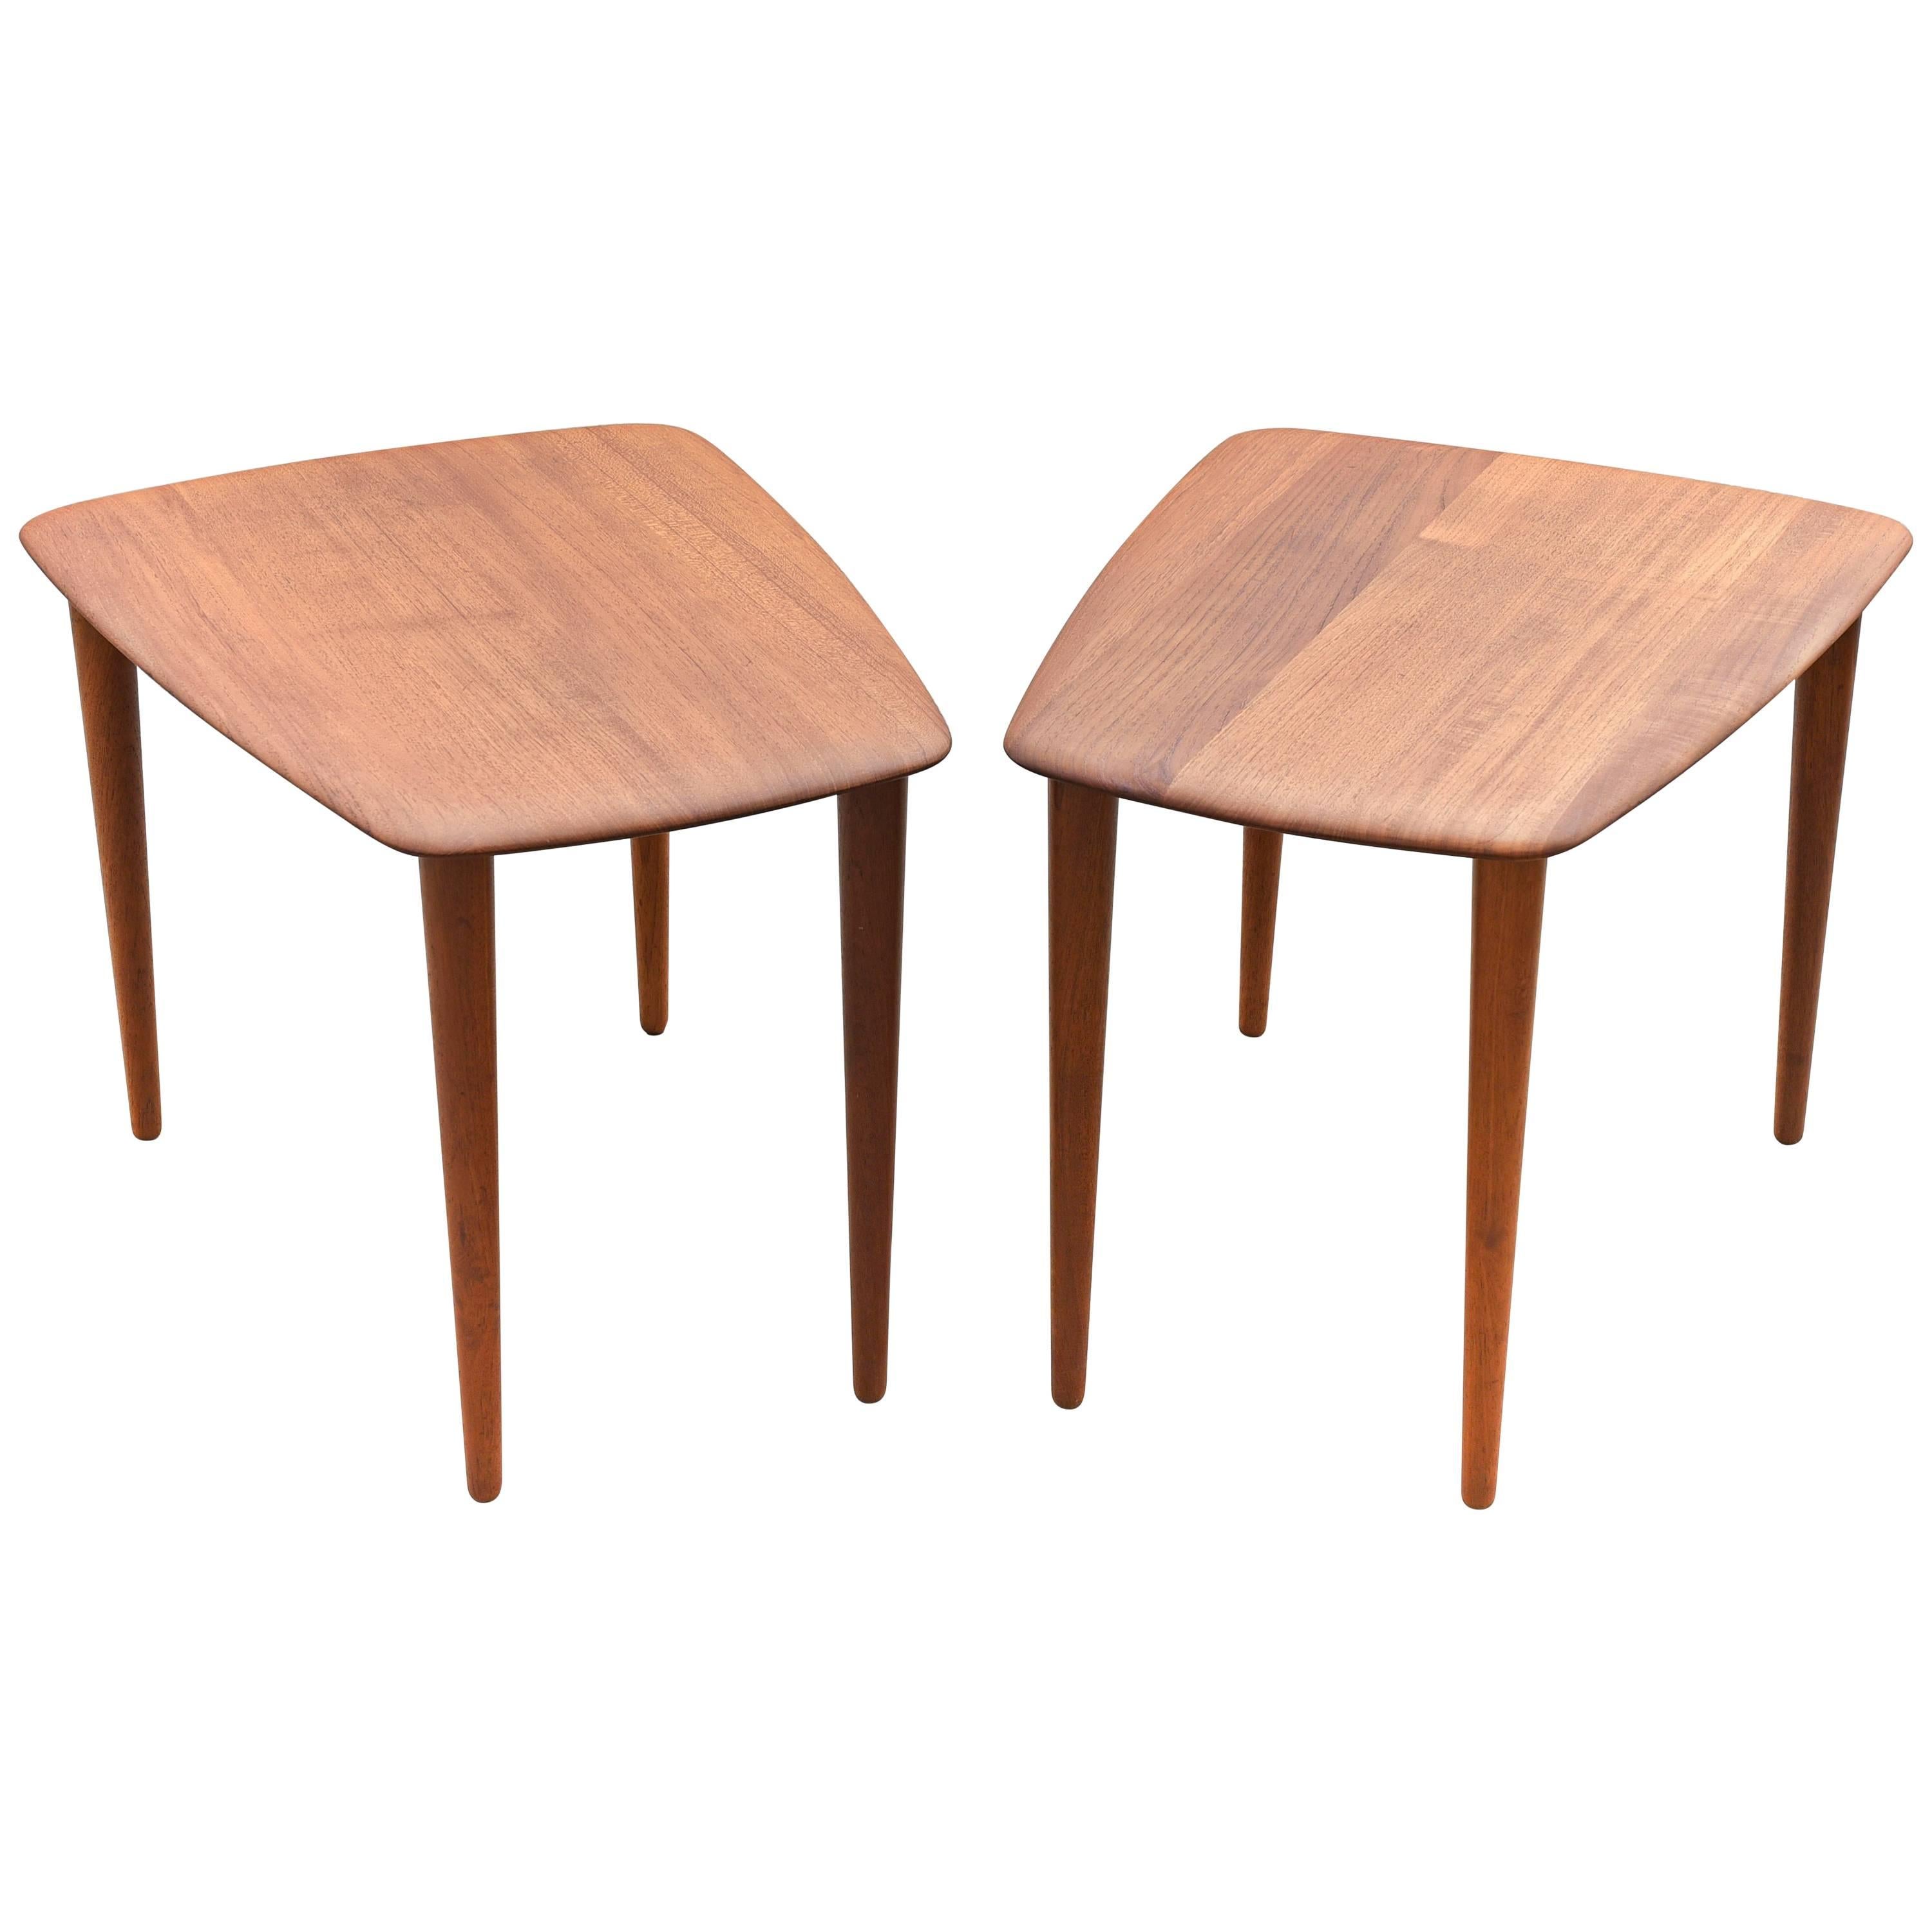 Pair of Side Tables by Peter Hvidt for France & Sons